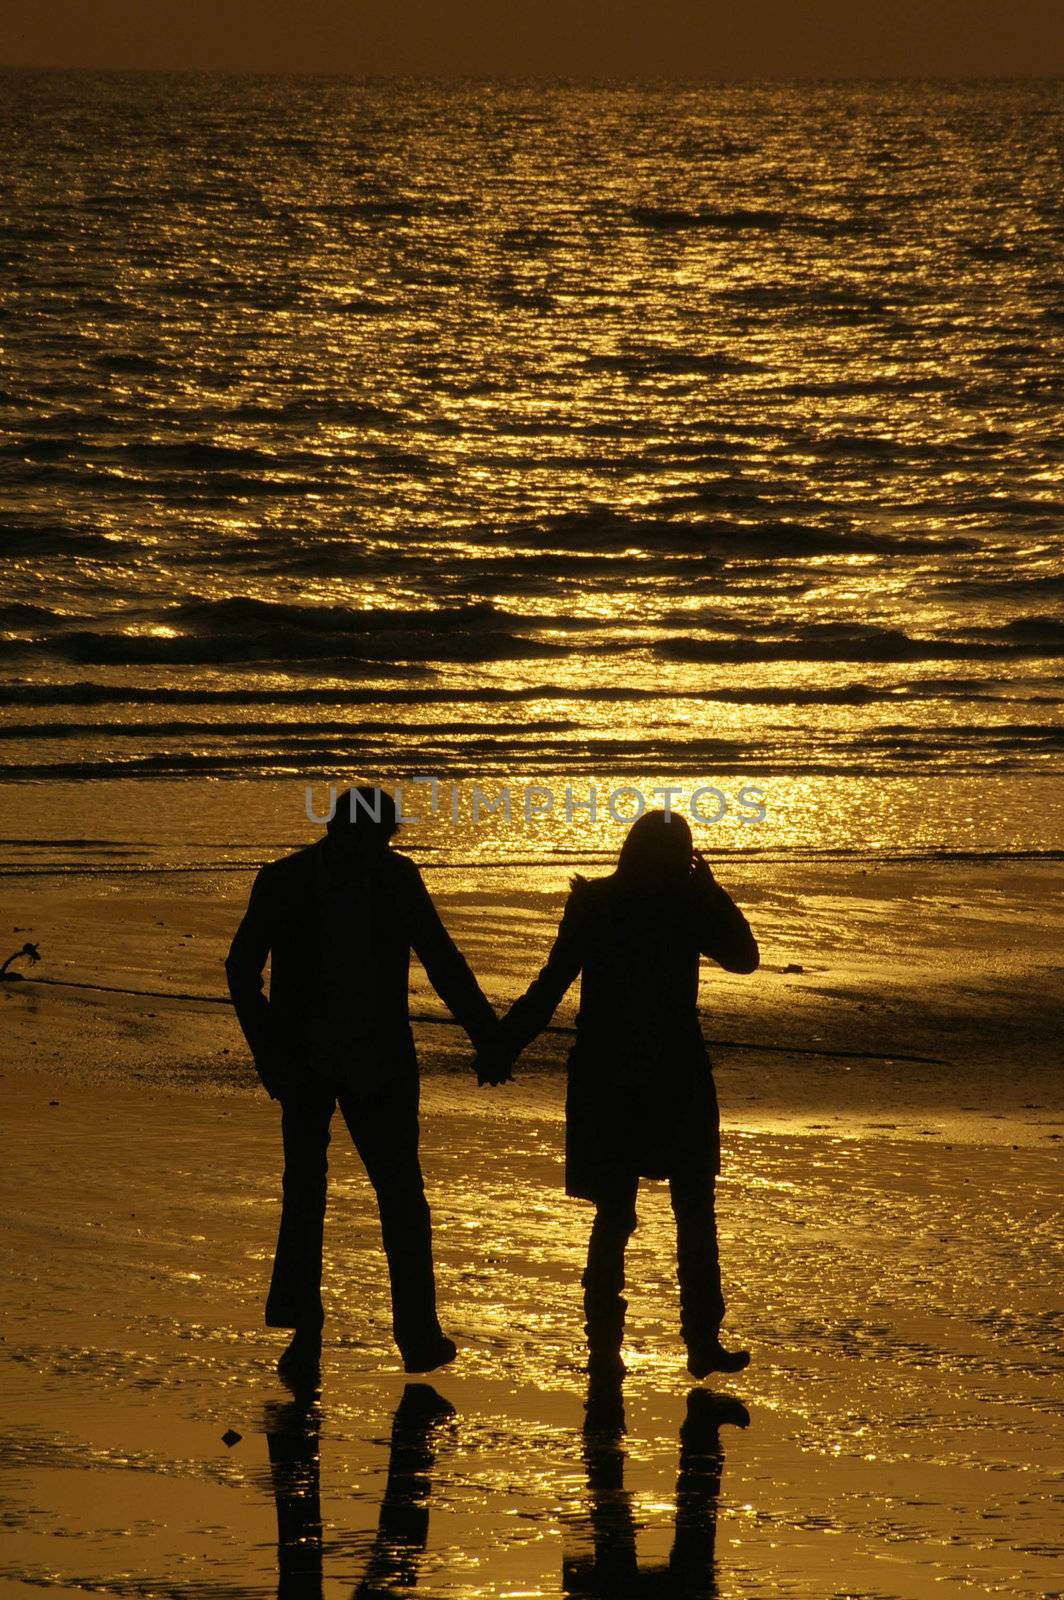 Couple at sunset by kawing921